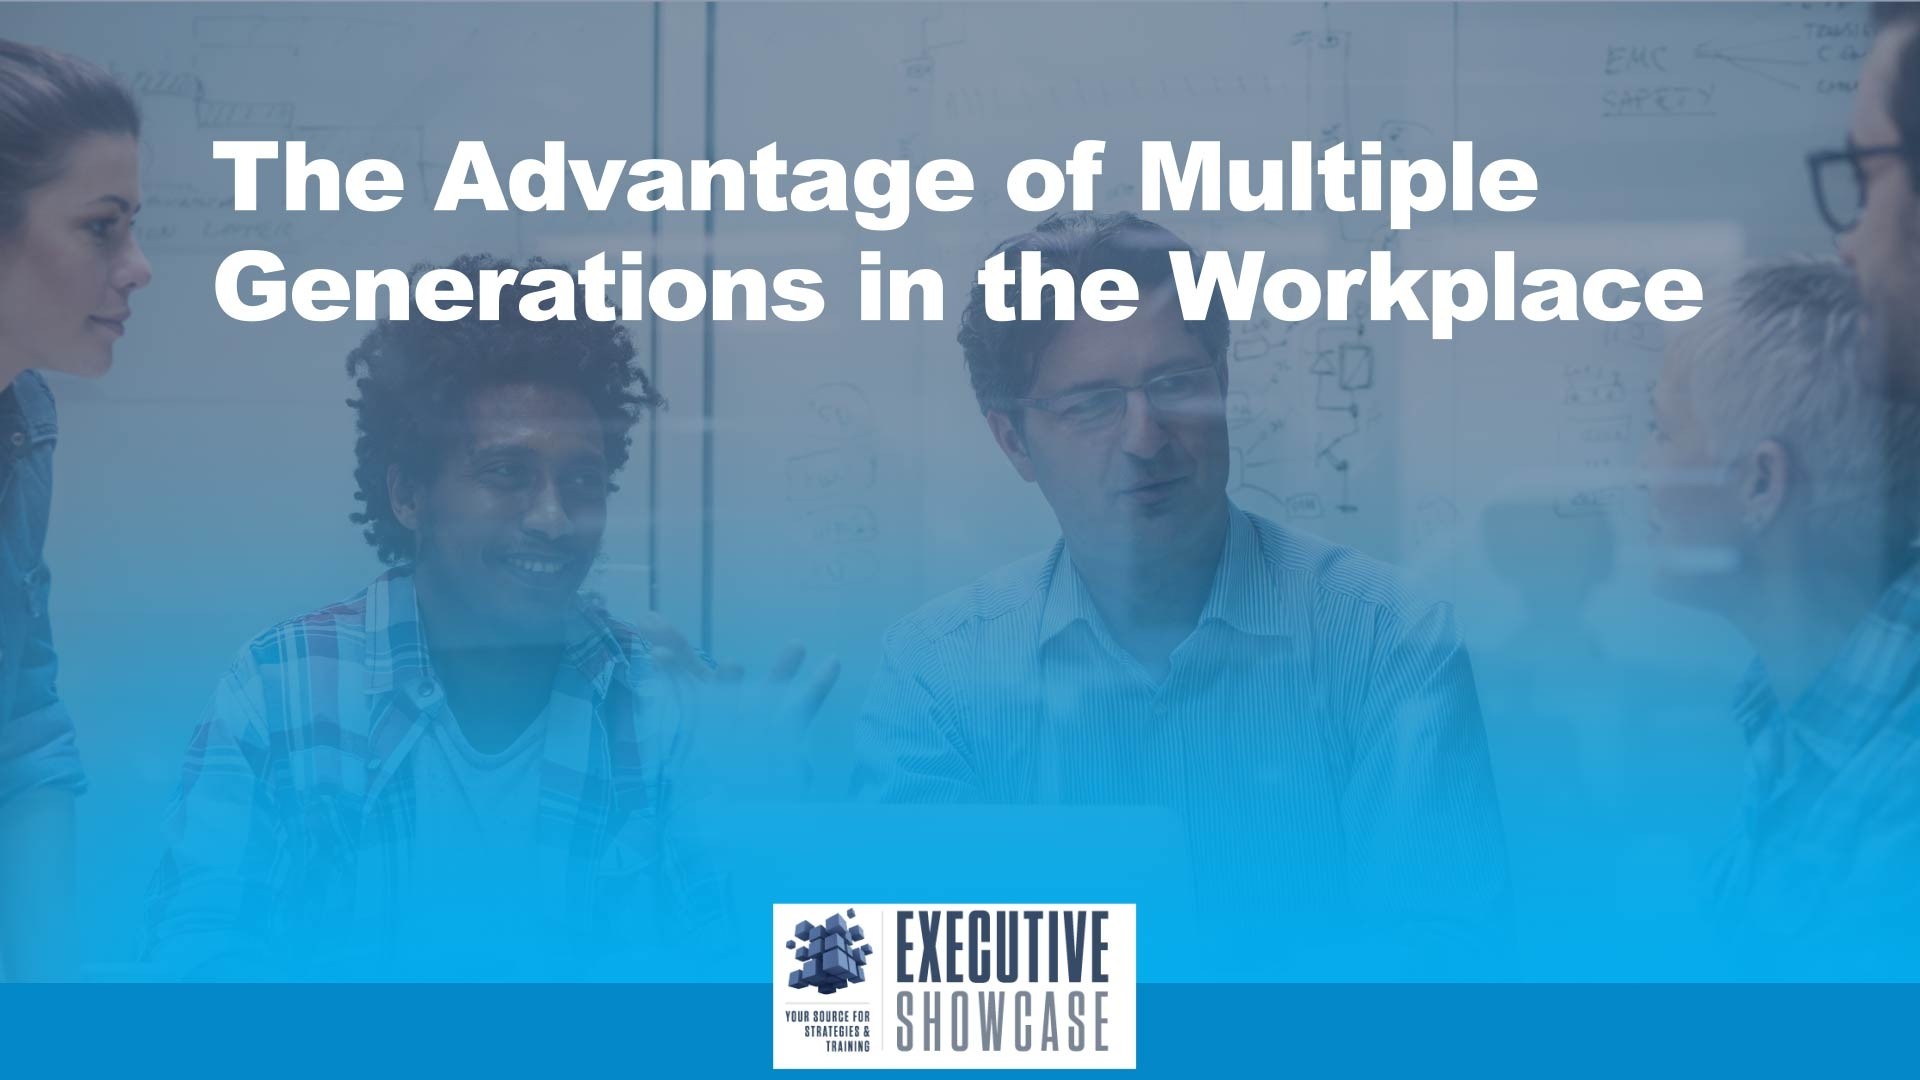 Workforce Advantages to Multiple Generations